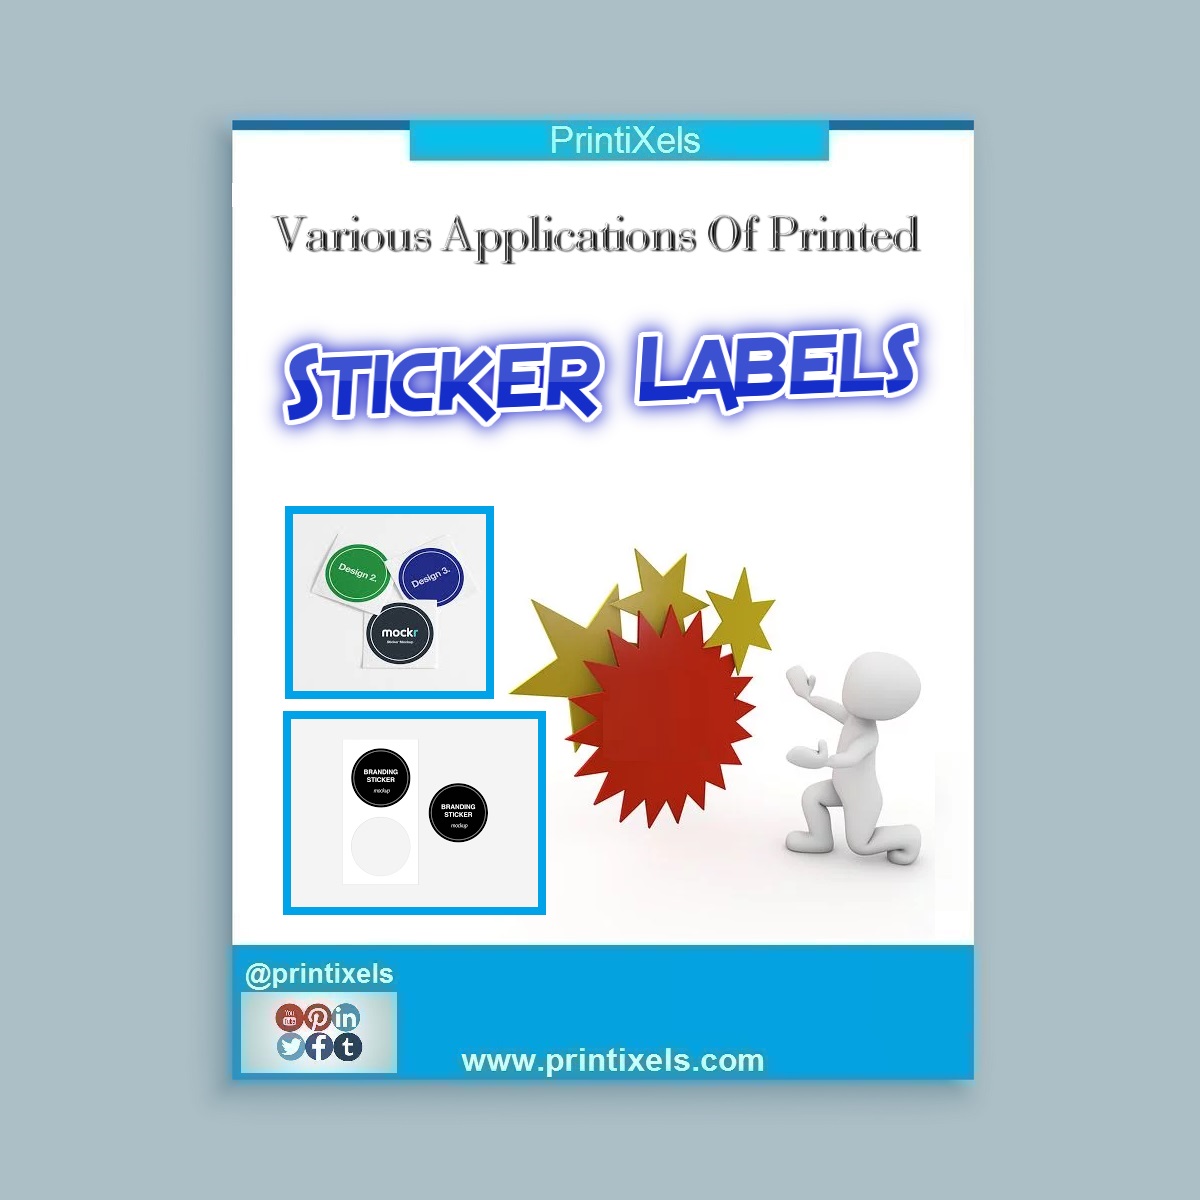 Various Applications of Printed Sticker Labels